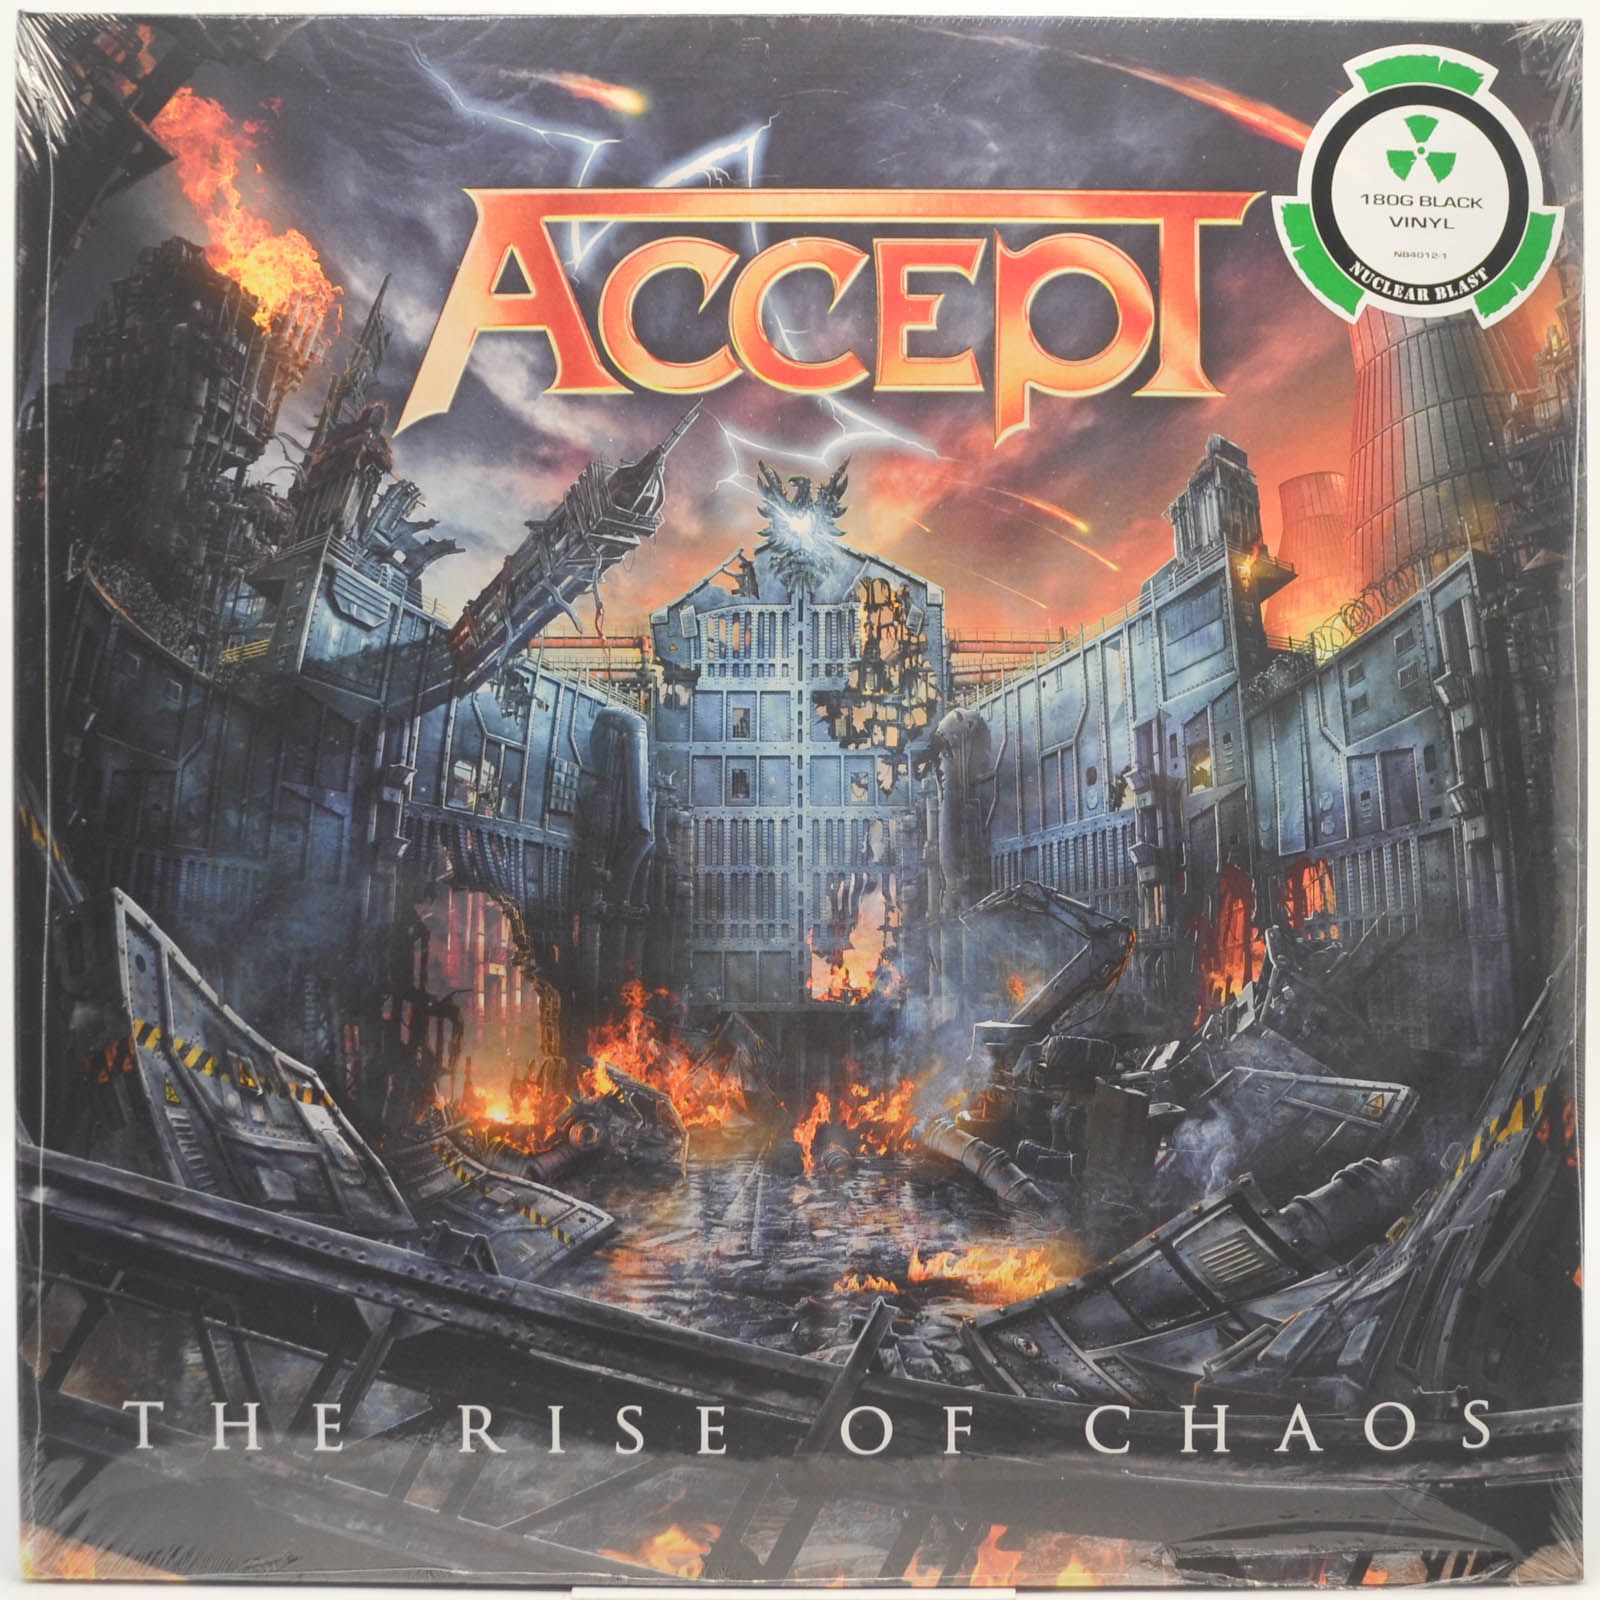 Accept — The Rise Of Chaos (2LP), 2017